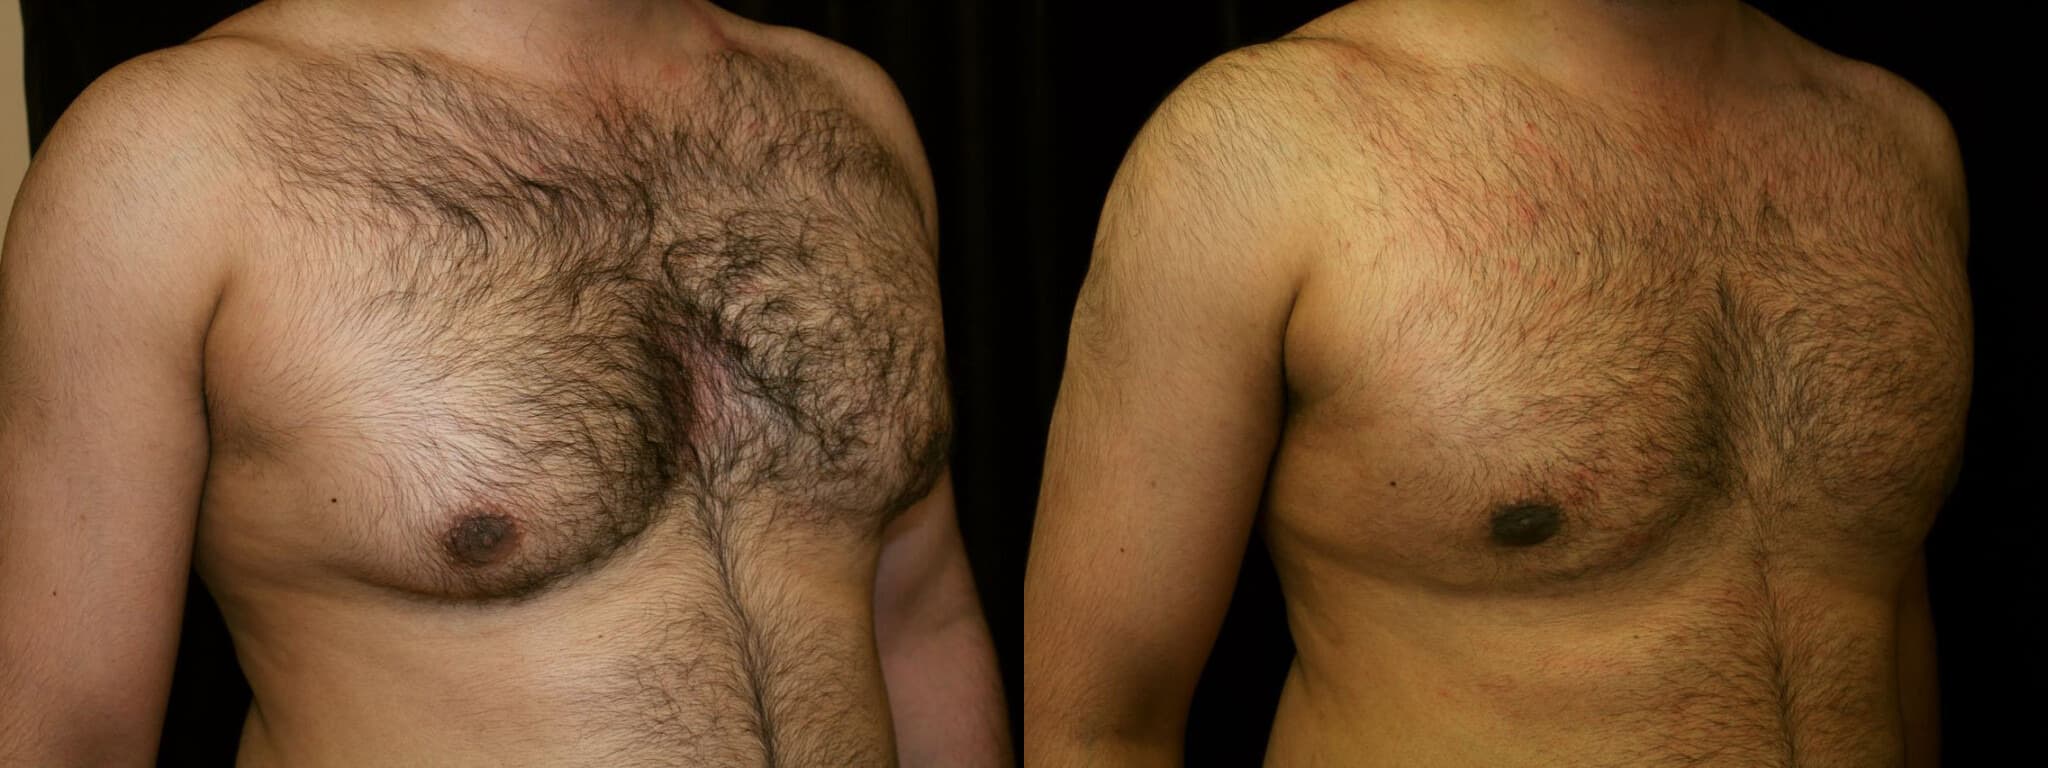 Gynecomastia Patient 2 Before & After Details